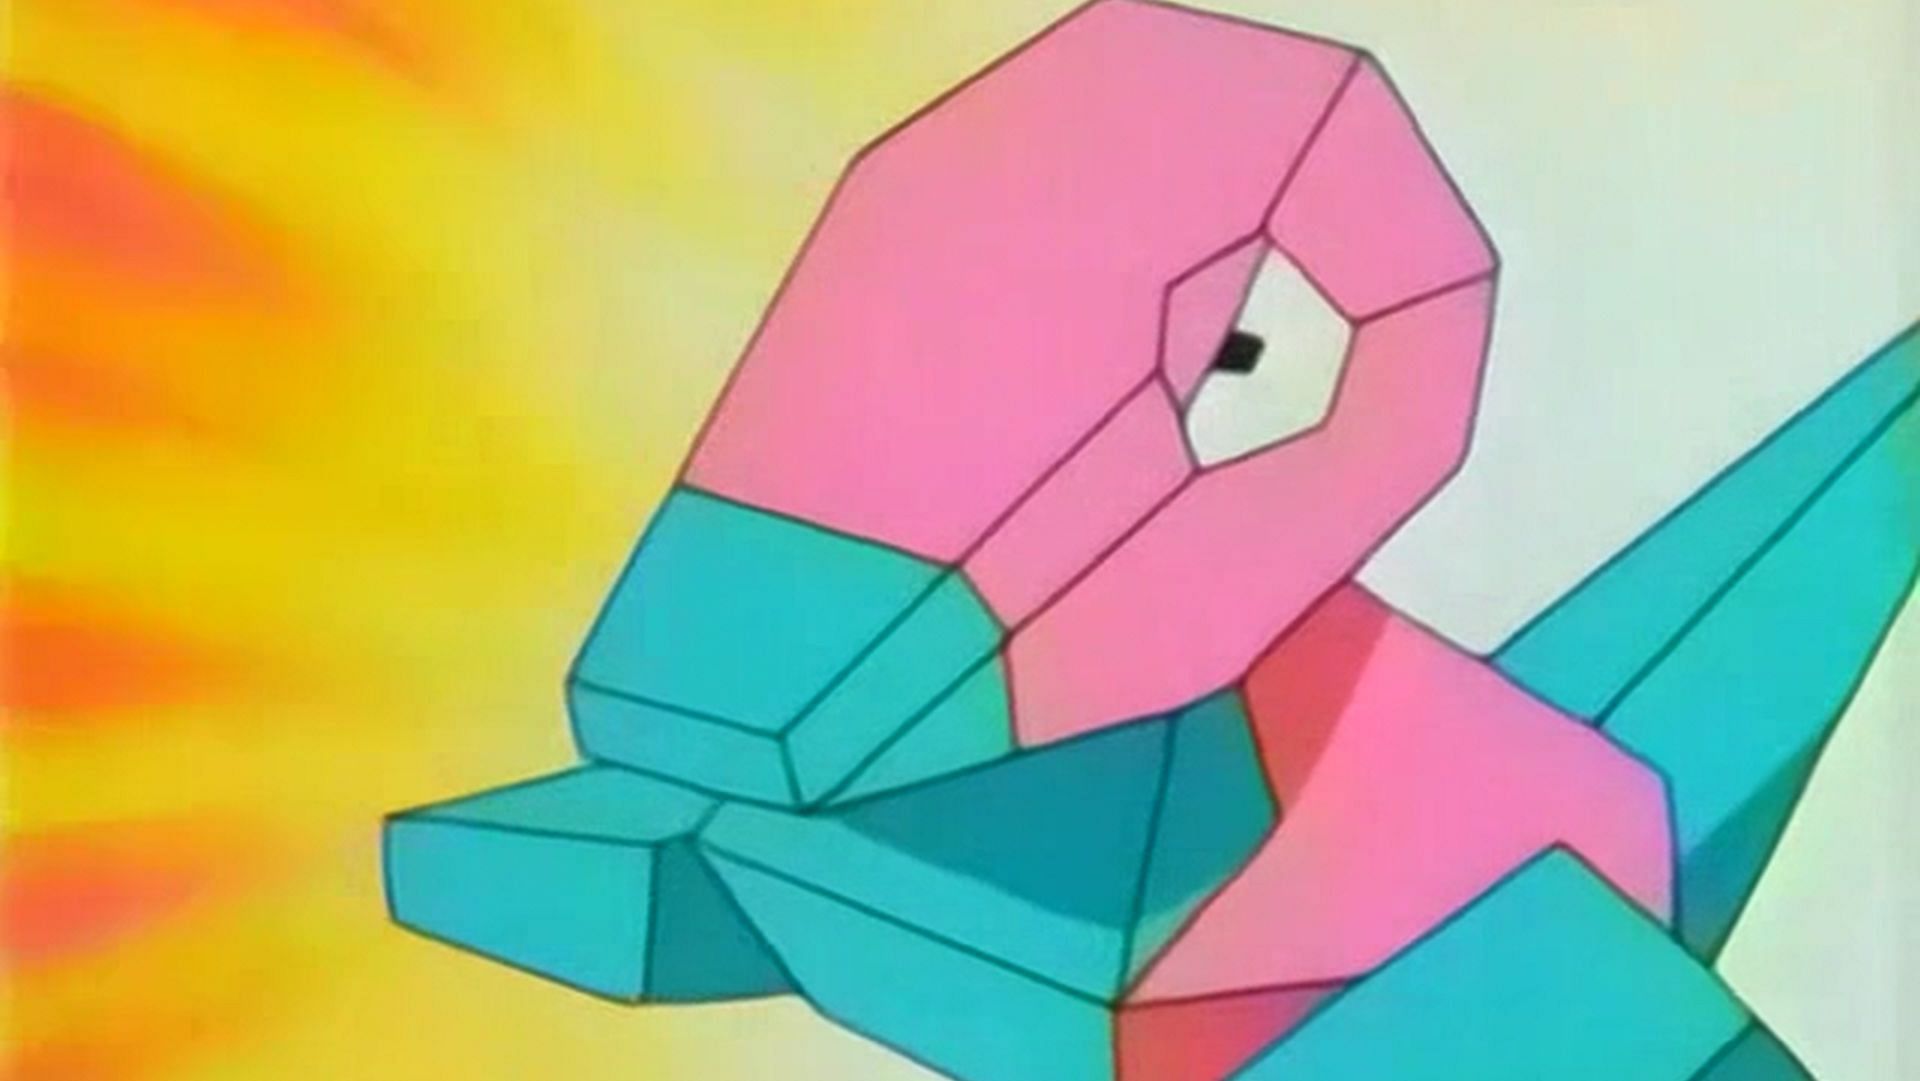 Porygon as it appears in the anime (Image via The Pokemon Company)